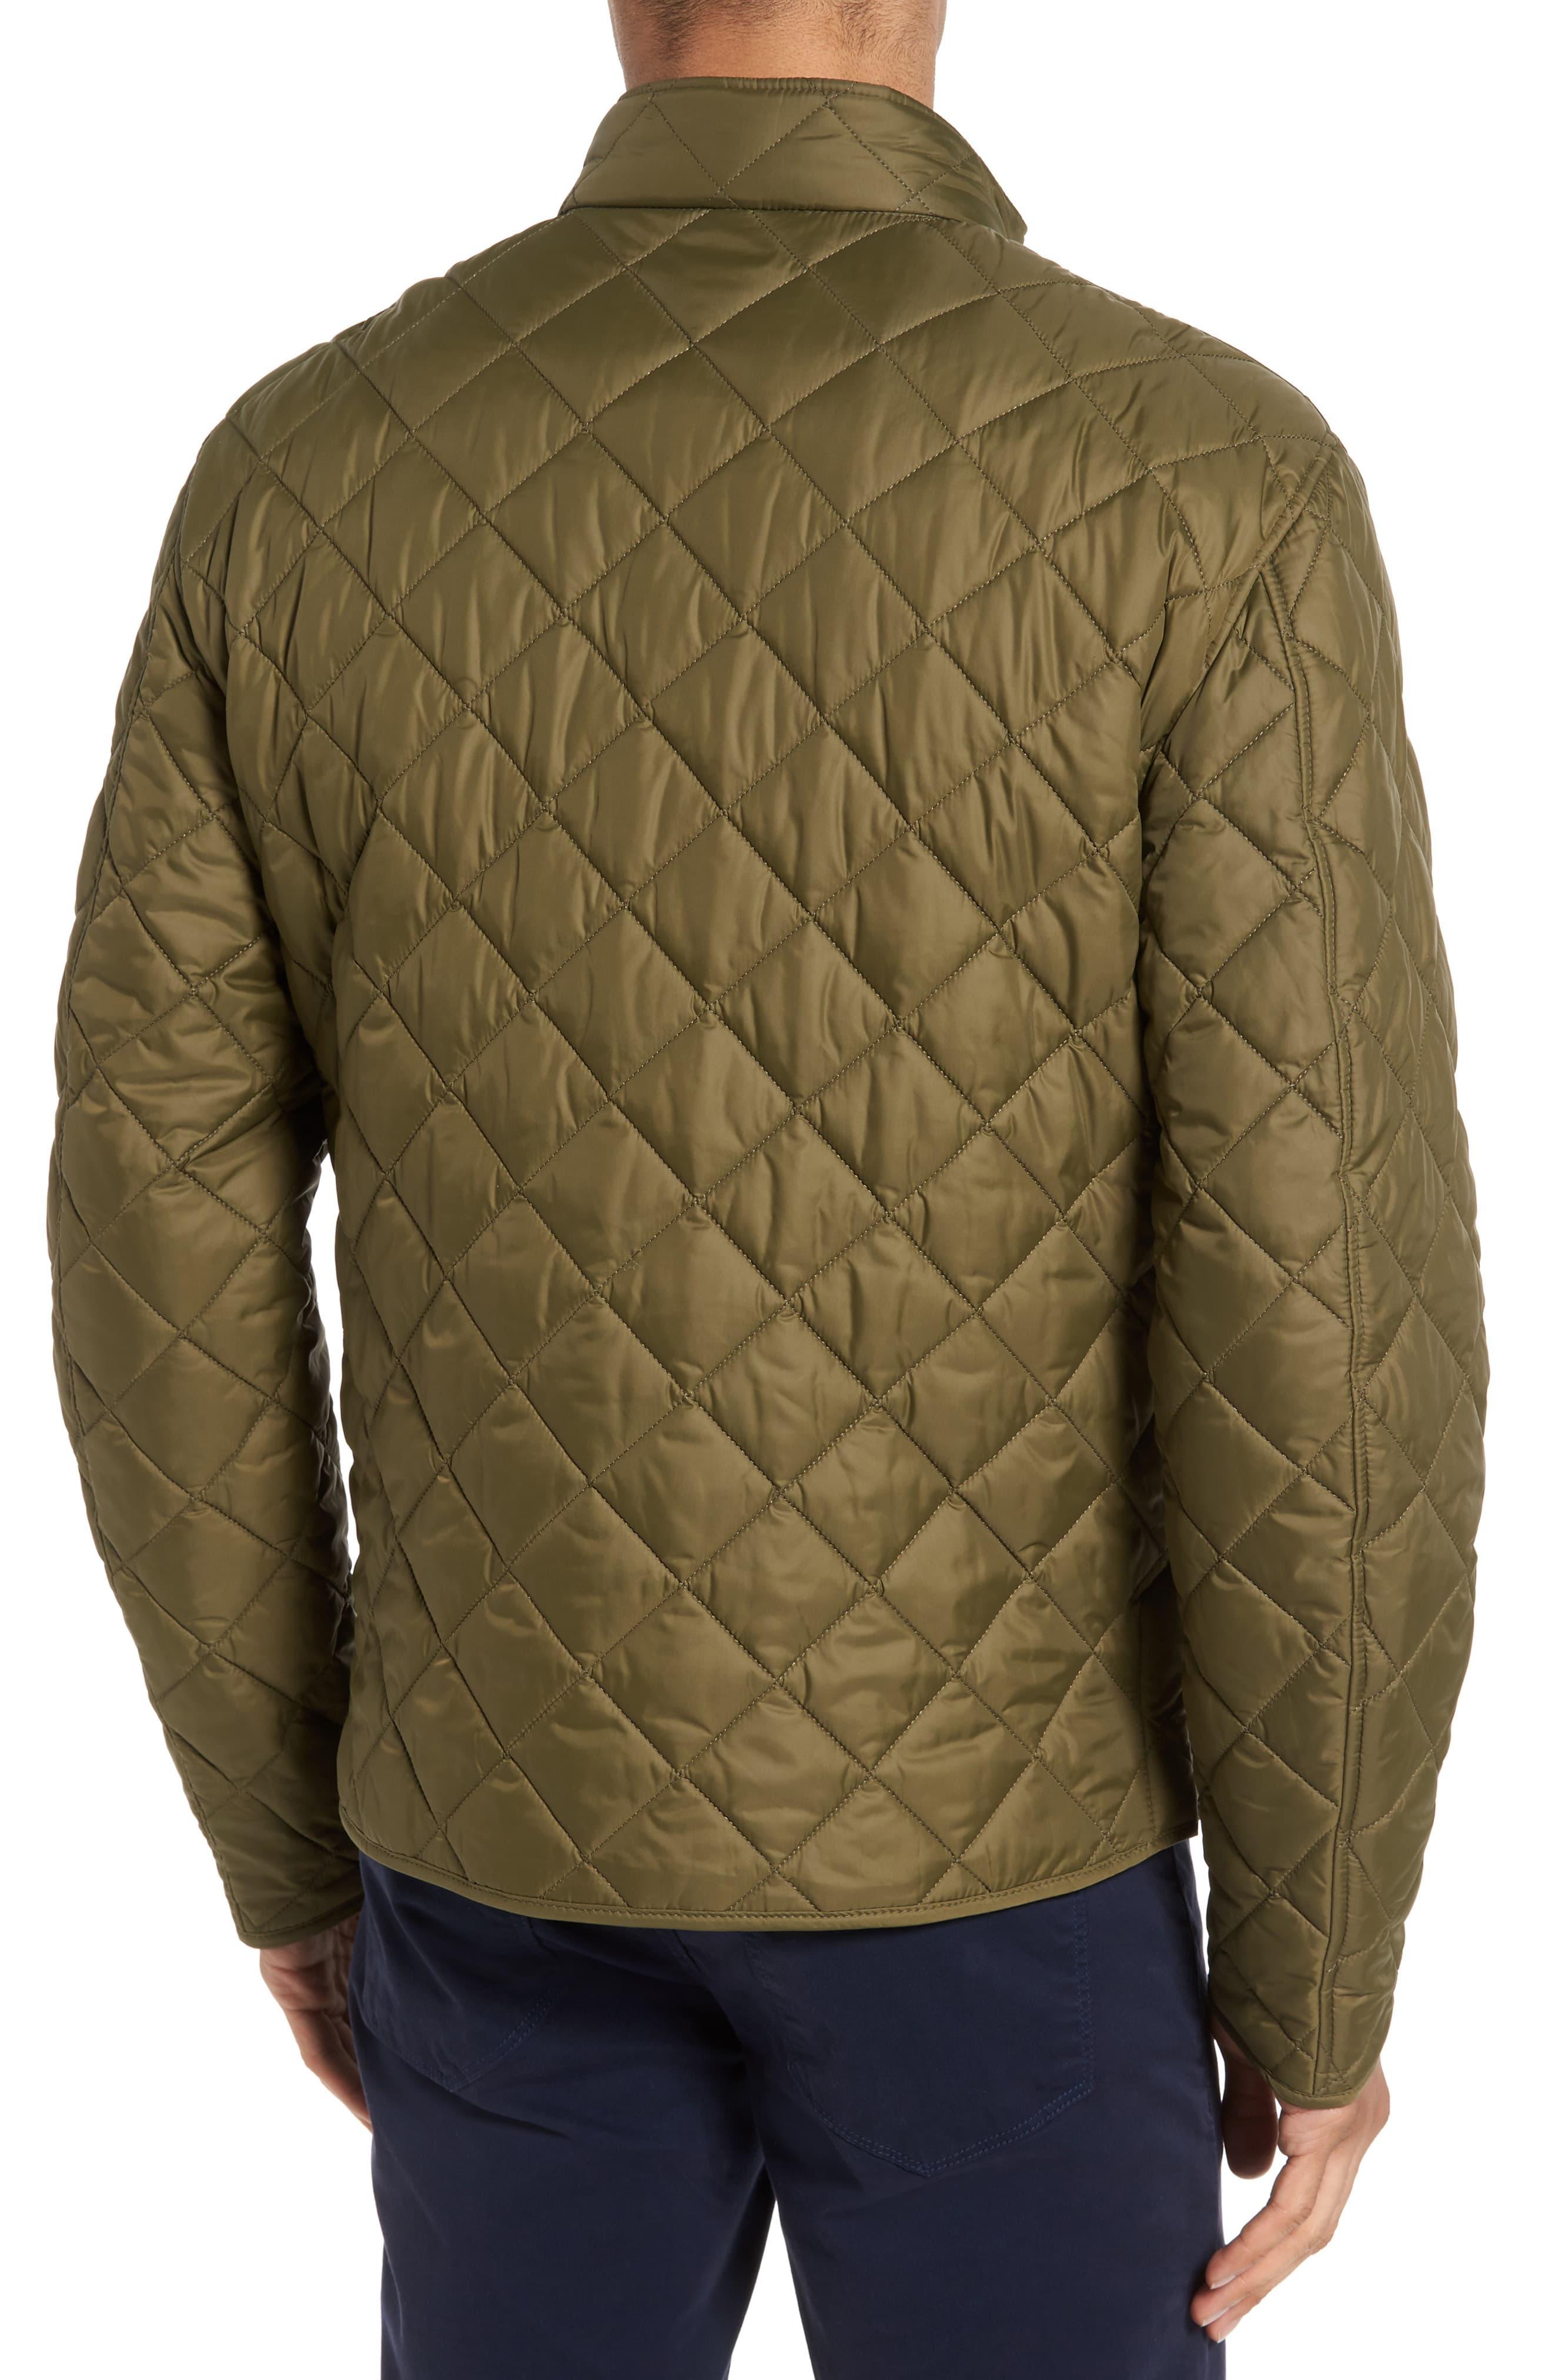 Barbour Pod Slim Fit Quilted Jacket in Olive (Green) for Men - Lyst